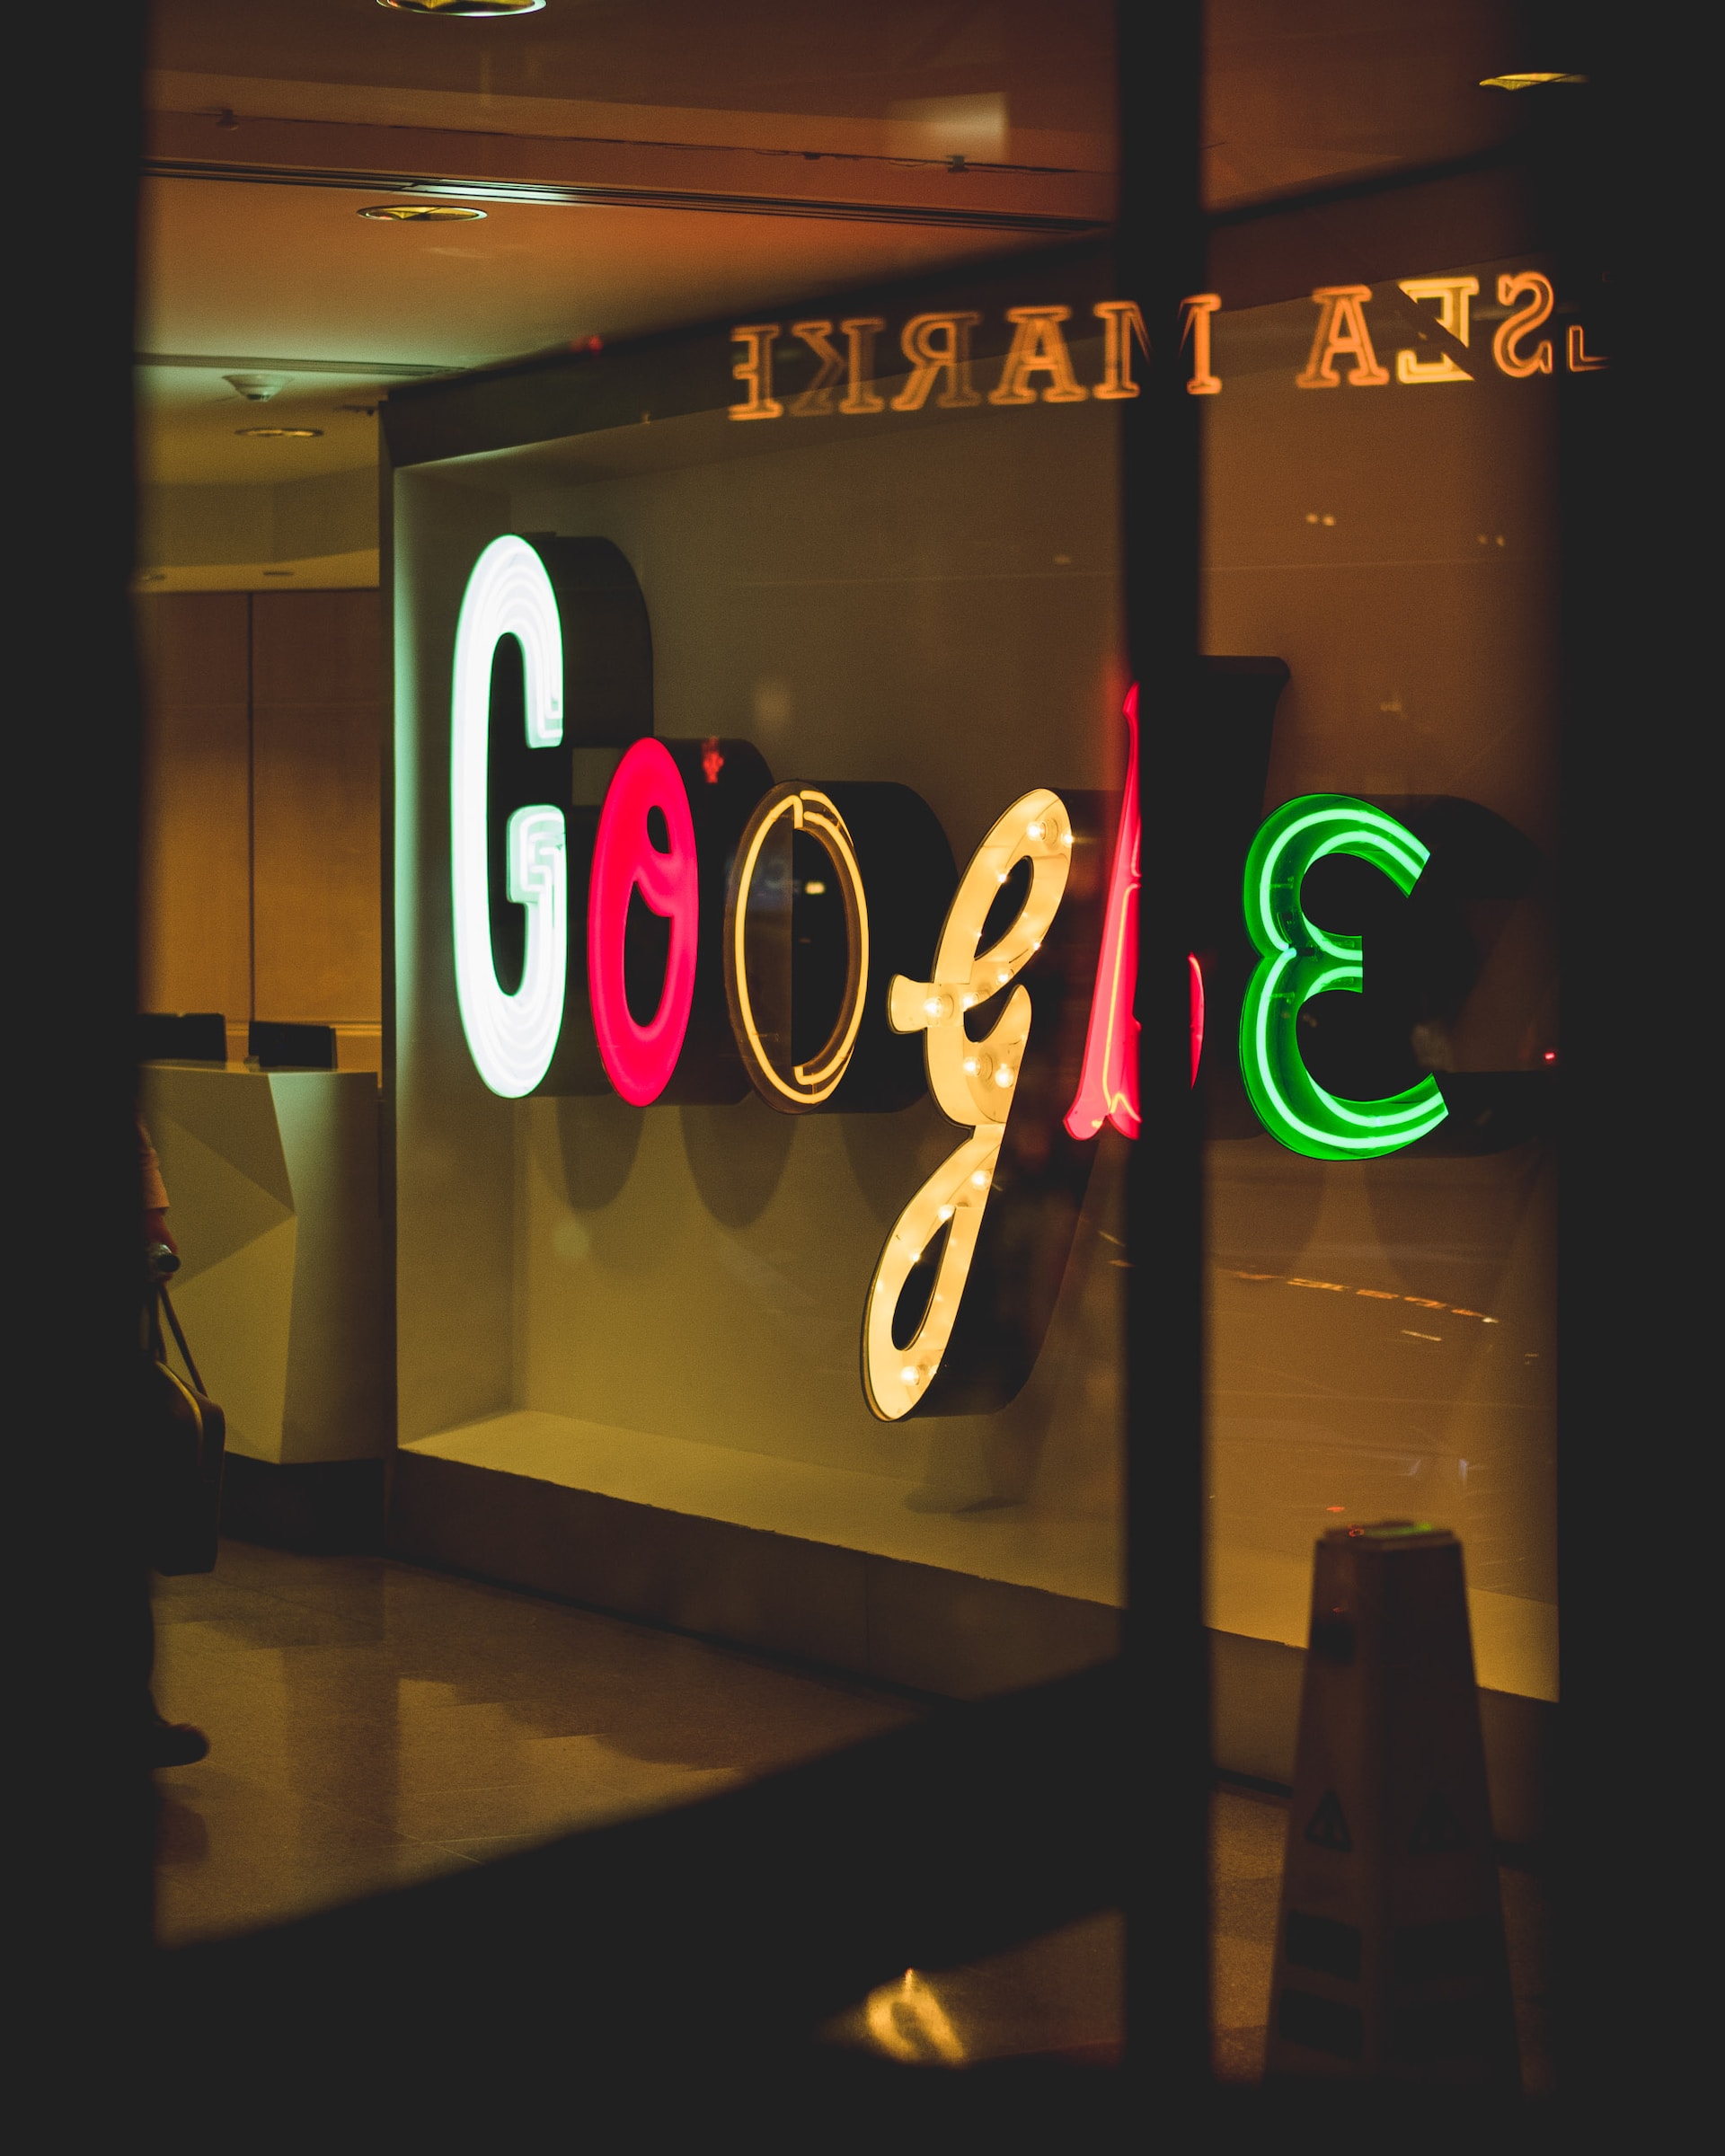 photo of a big LED google sign in a business - source: arthur-osipyan